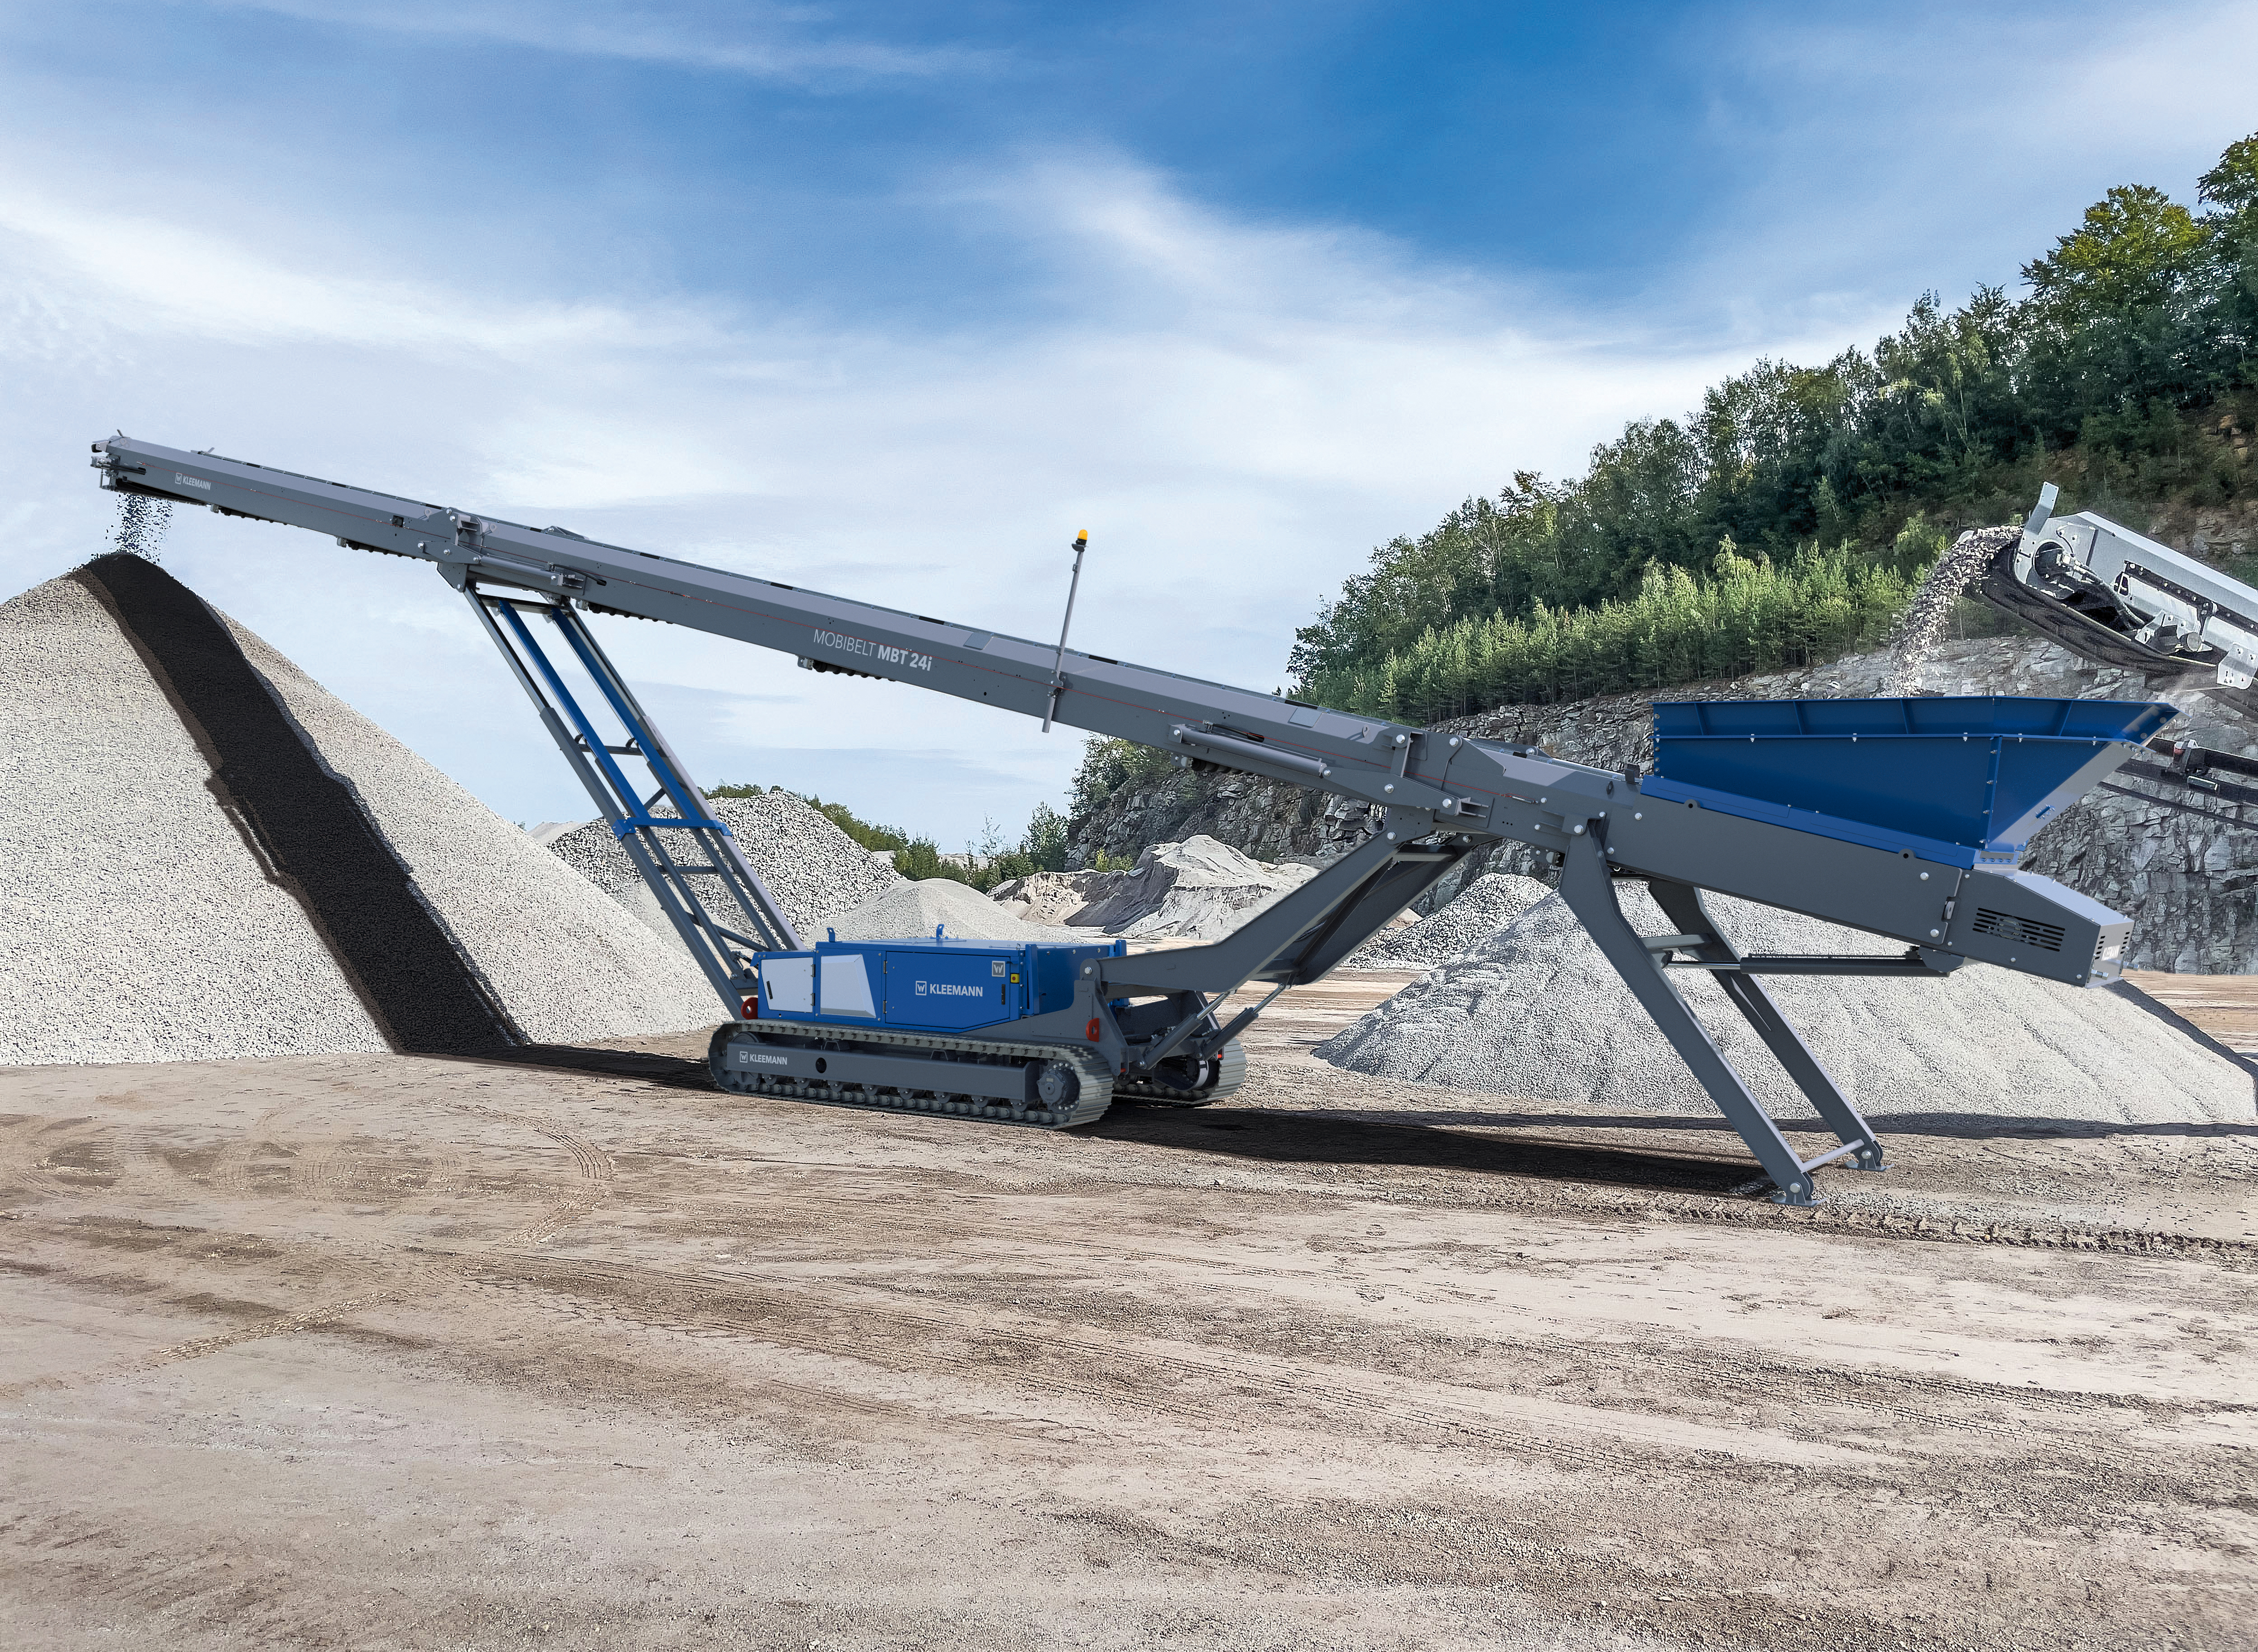 The mobile stackers MOBIBELT MBT 20(i) and MBT 24(i) from Kleemann make large stockpiles and improved work site logistics possible.